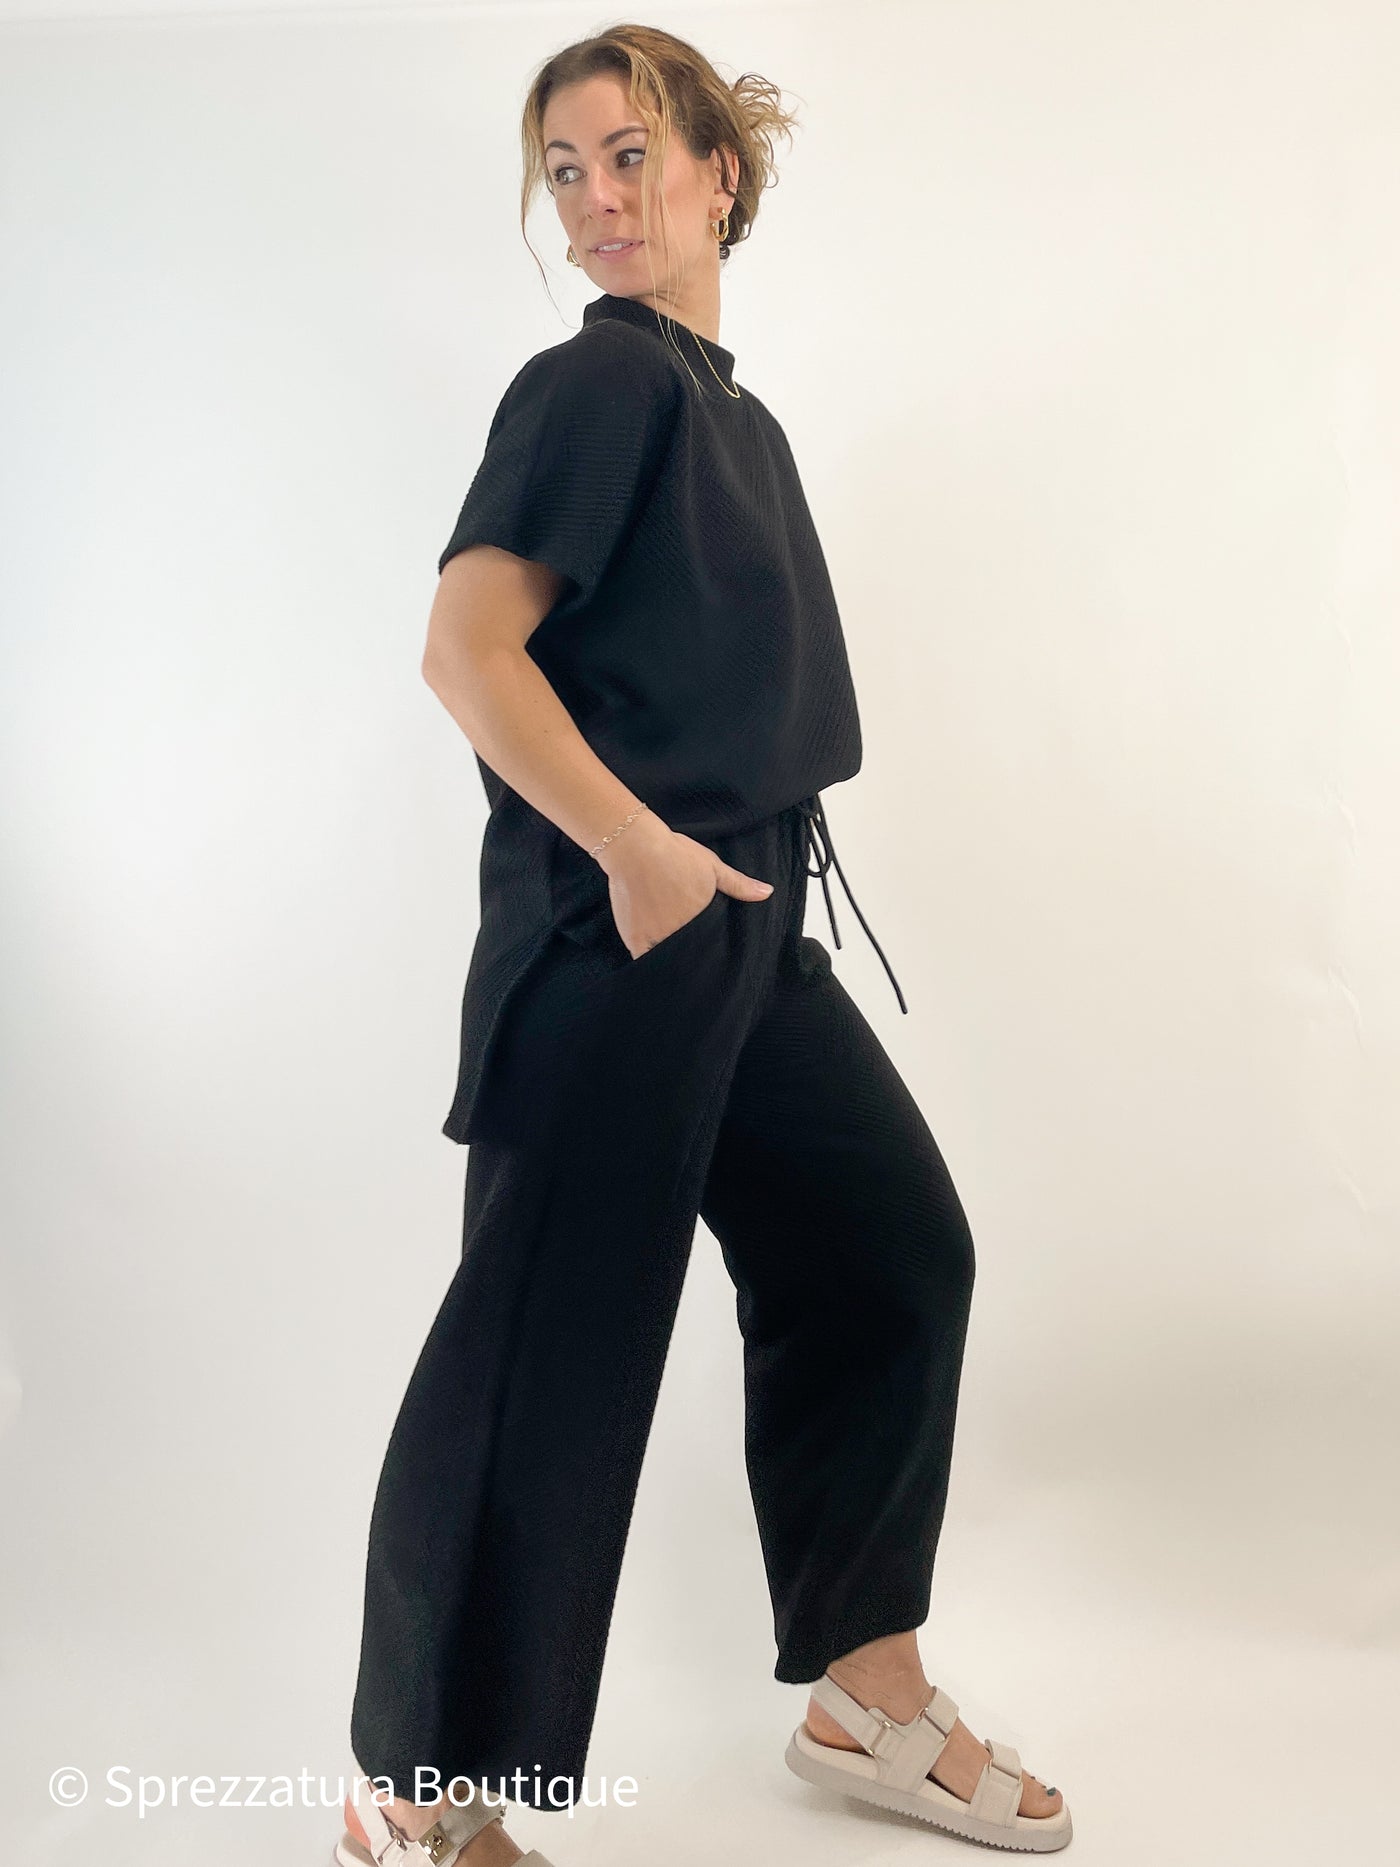 textured matching outfit set travel vacation black chic pants pockets elastic drawstring flare wide leg cropped chic comfortable Modern smart causal female chic effortless outfit womens ladies gift elegant effortless clothing everyday stylish clothes apparel outfits chic winter fall autumn professional style women’s boutique trendy teacher office cute outfit boutique clothes fashion quality work from home neutral wardrobe essential basics lounge athleisure gift for her geometric quilted